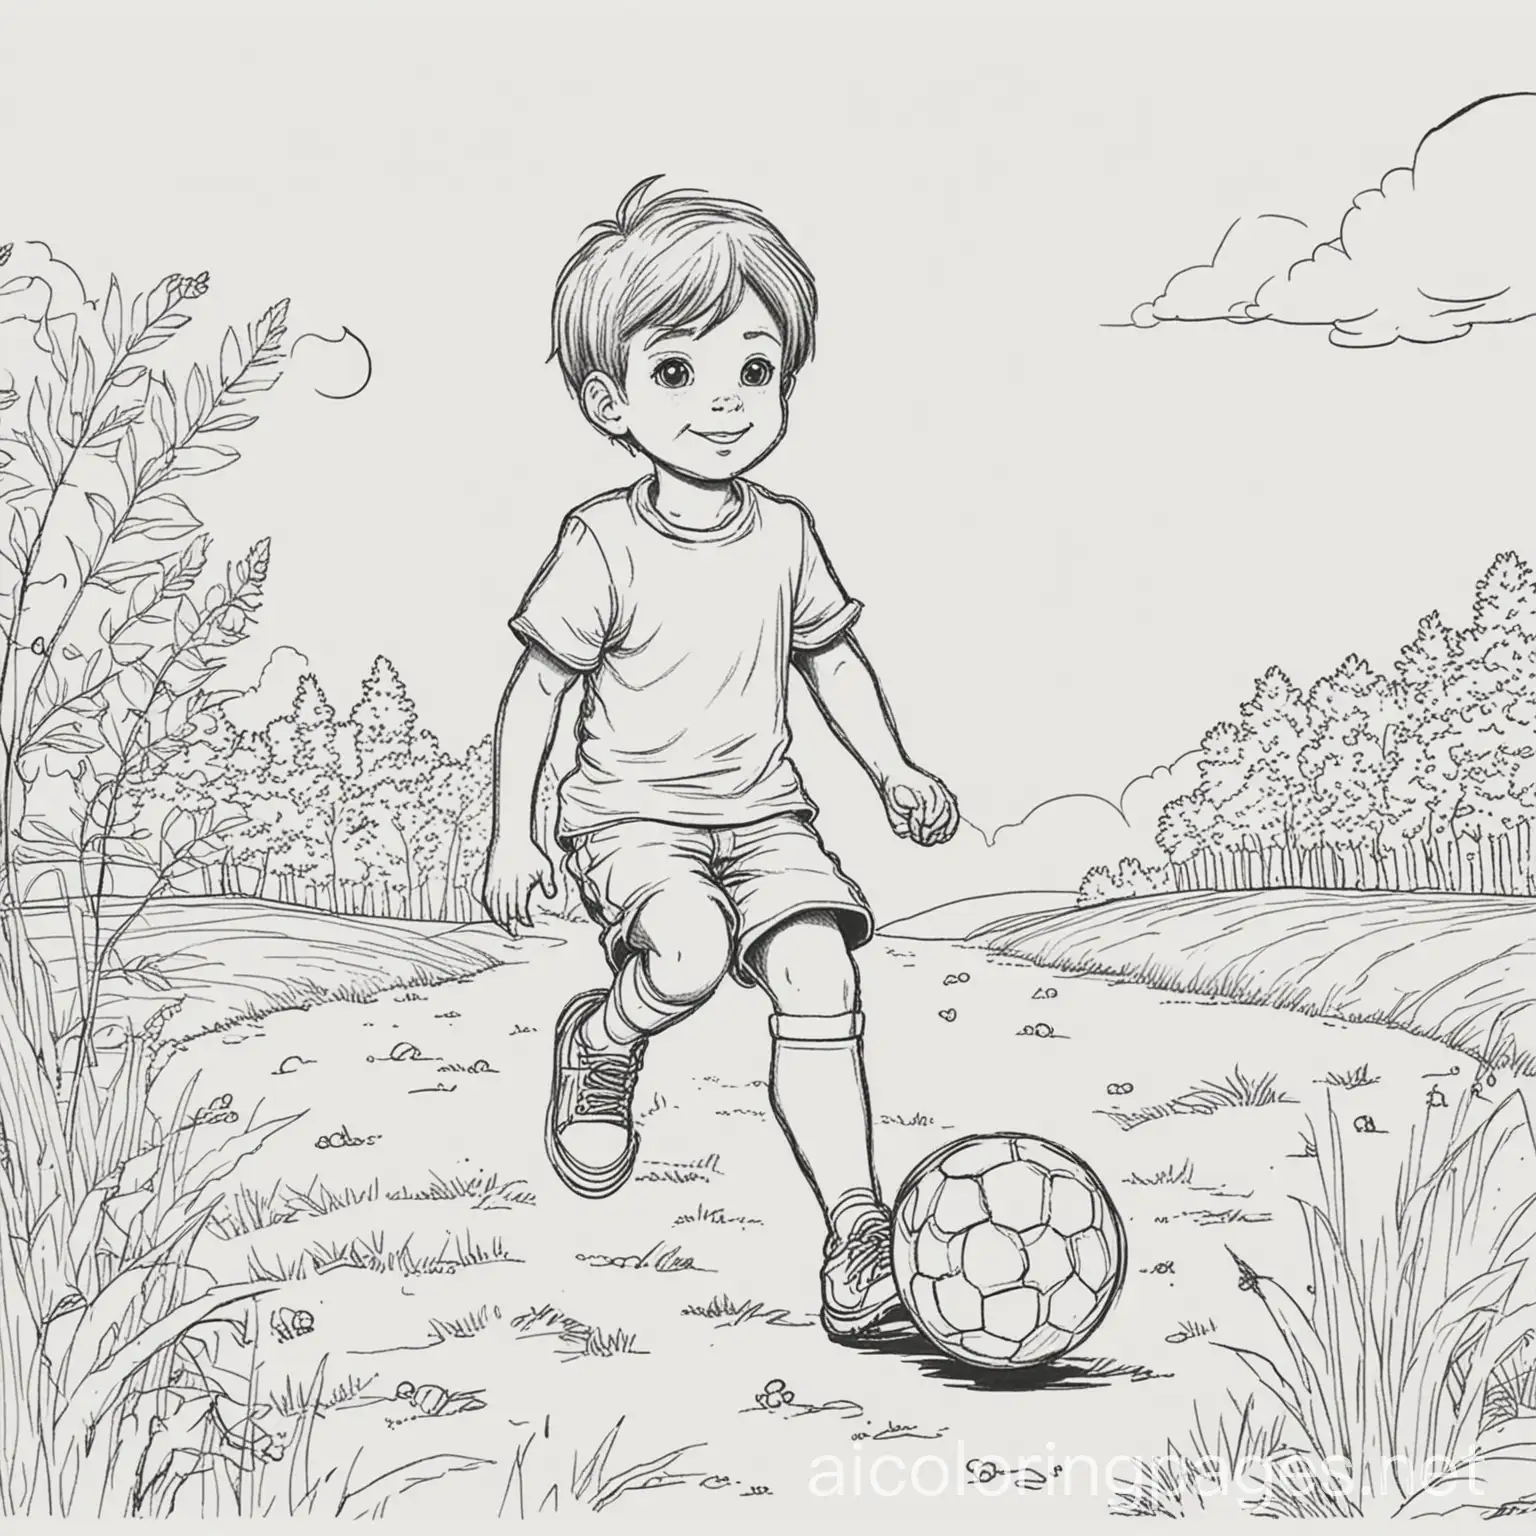 A boy kicking a ball . He’s in a field. Colouring page, black and white, line art, white background. Simplicity, ample white space. The background of the colouring page is white to make it easy for young kids to colour within the lines. The outlines of the subjects are easy to distinguish making it simple for kids to colour. Very simple design for young children , Coloring Page, black and white, line art, white background, Simplicity, Ample White Space. The background of the coloring page is plain white to make it easy for young children to color within the lines. The outlines of all the subjects are easy to distinguish, making it simple for kids to color without too much difficulty